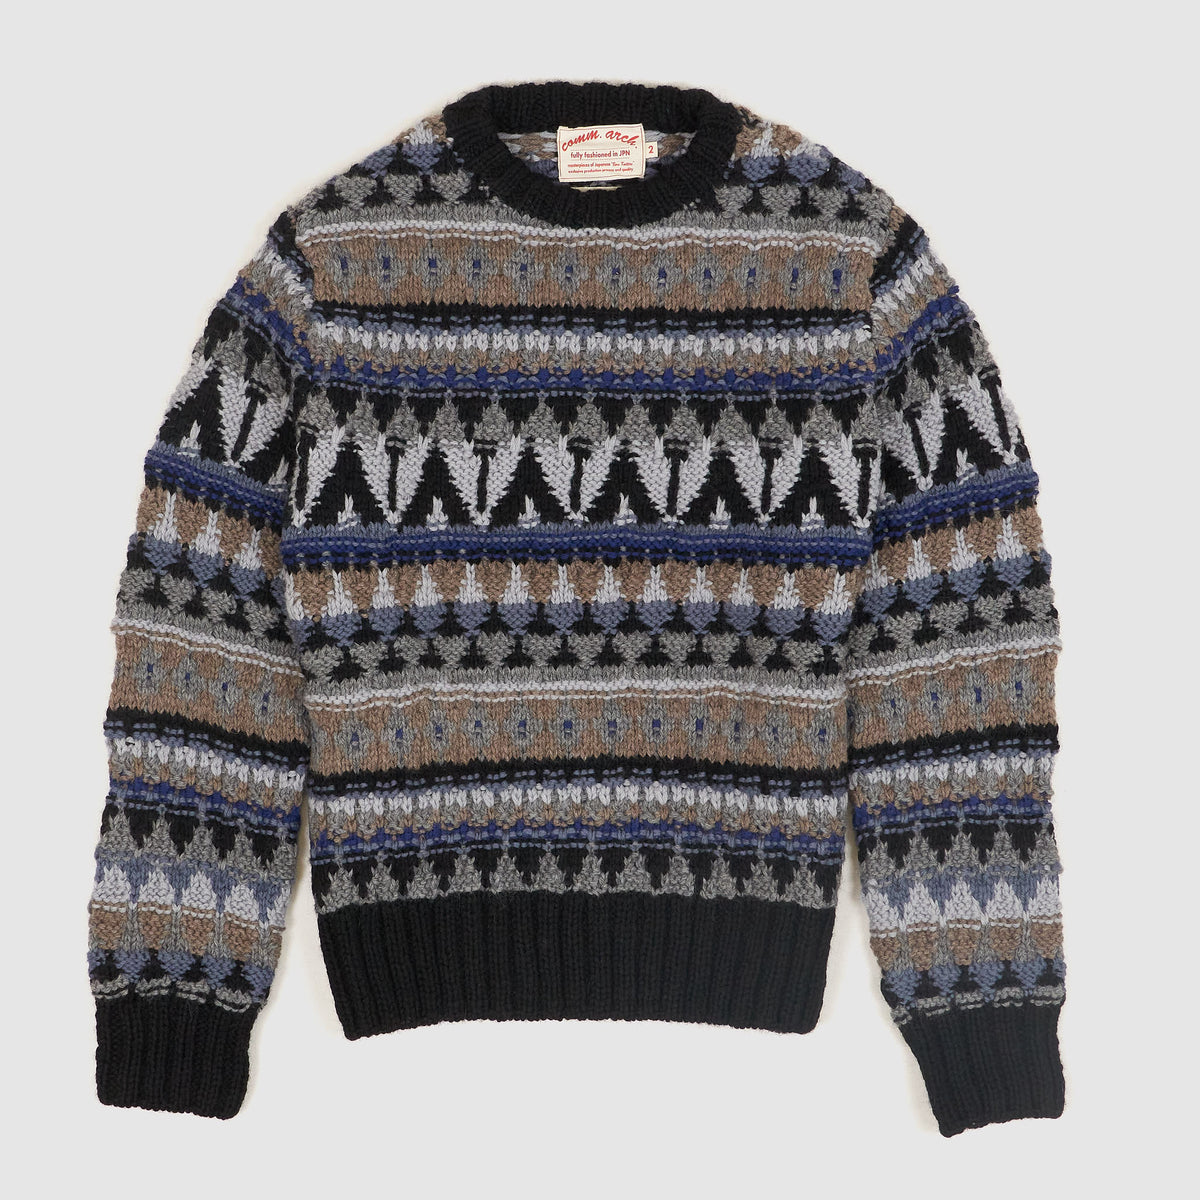 Comm Arch Crew Neck Hand Knitted Jumper